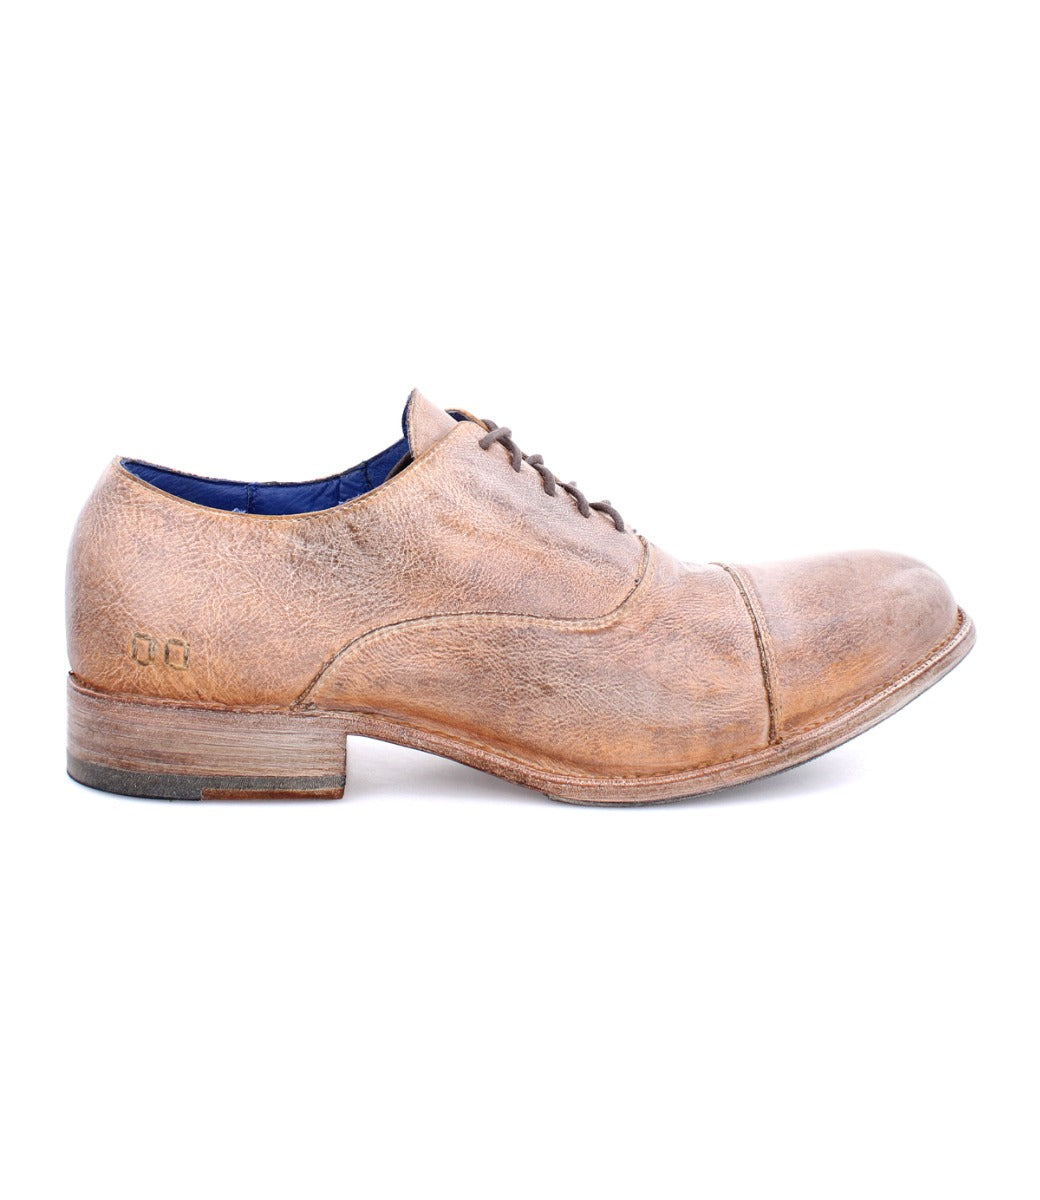 A men's brown Bed Stu Thorn oxford shoe on a white background.